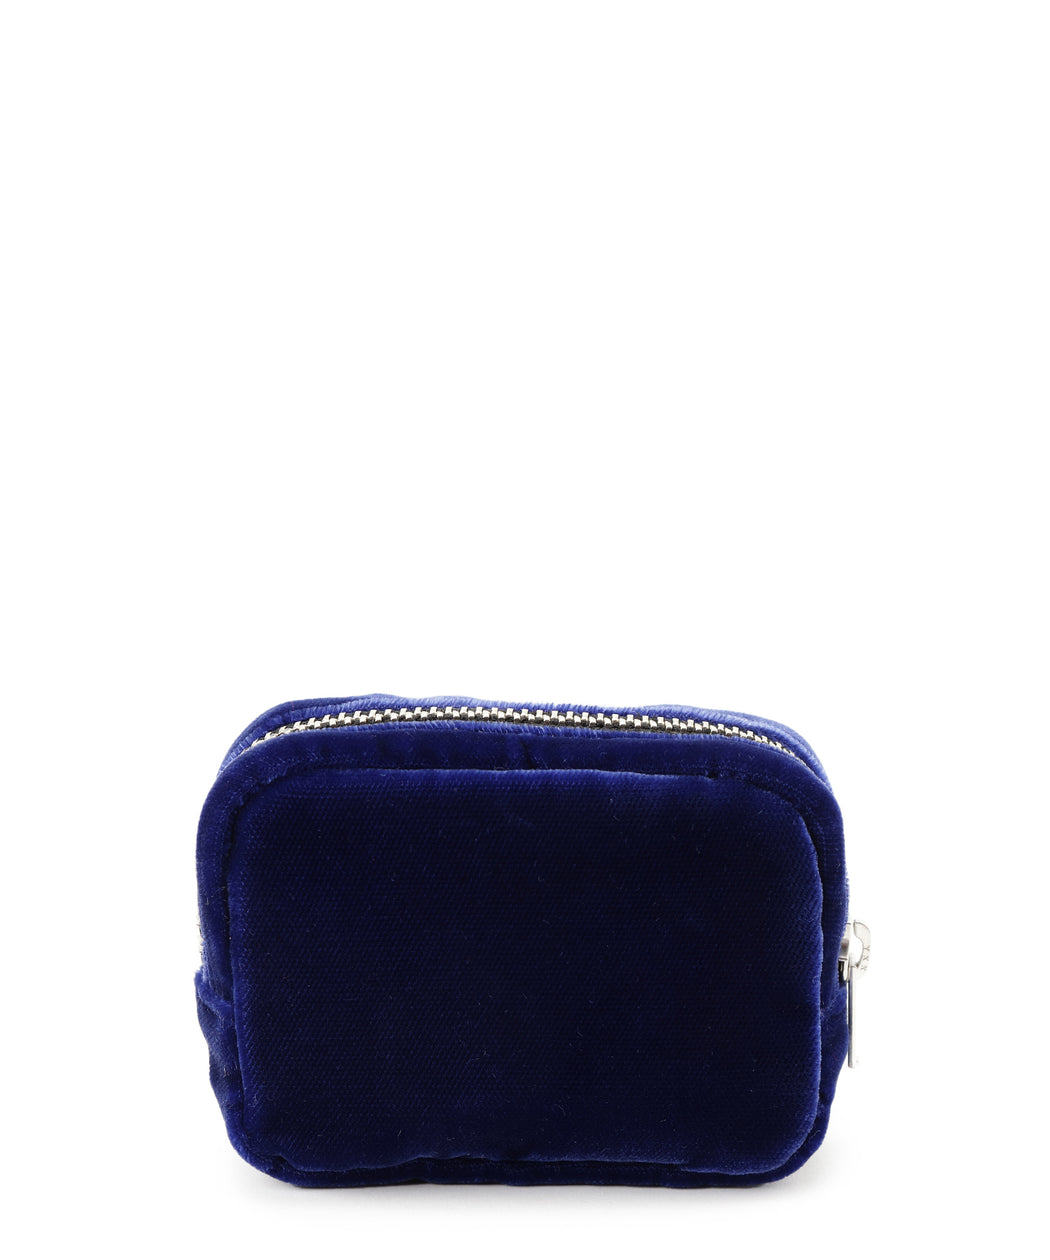 24S-Pouch 002